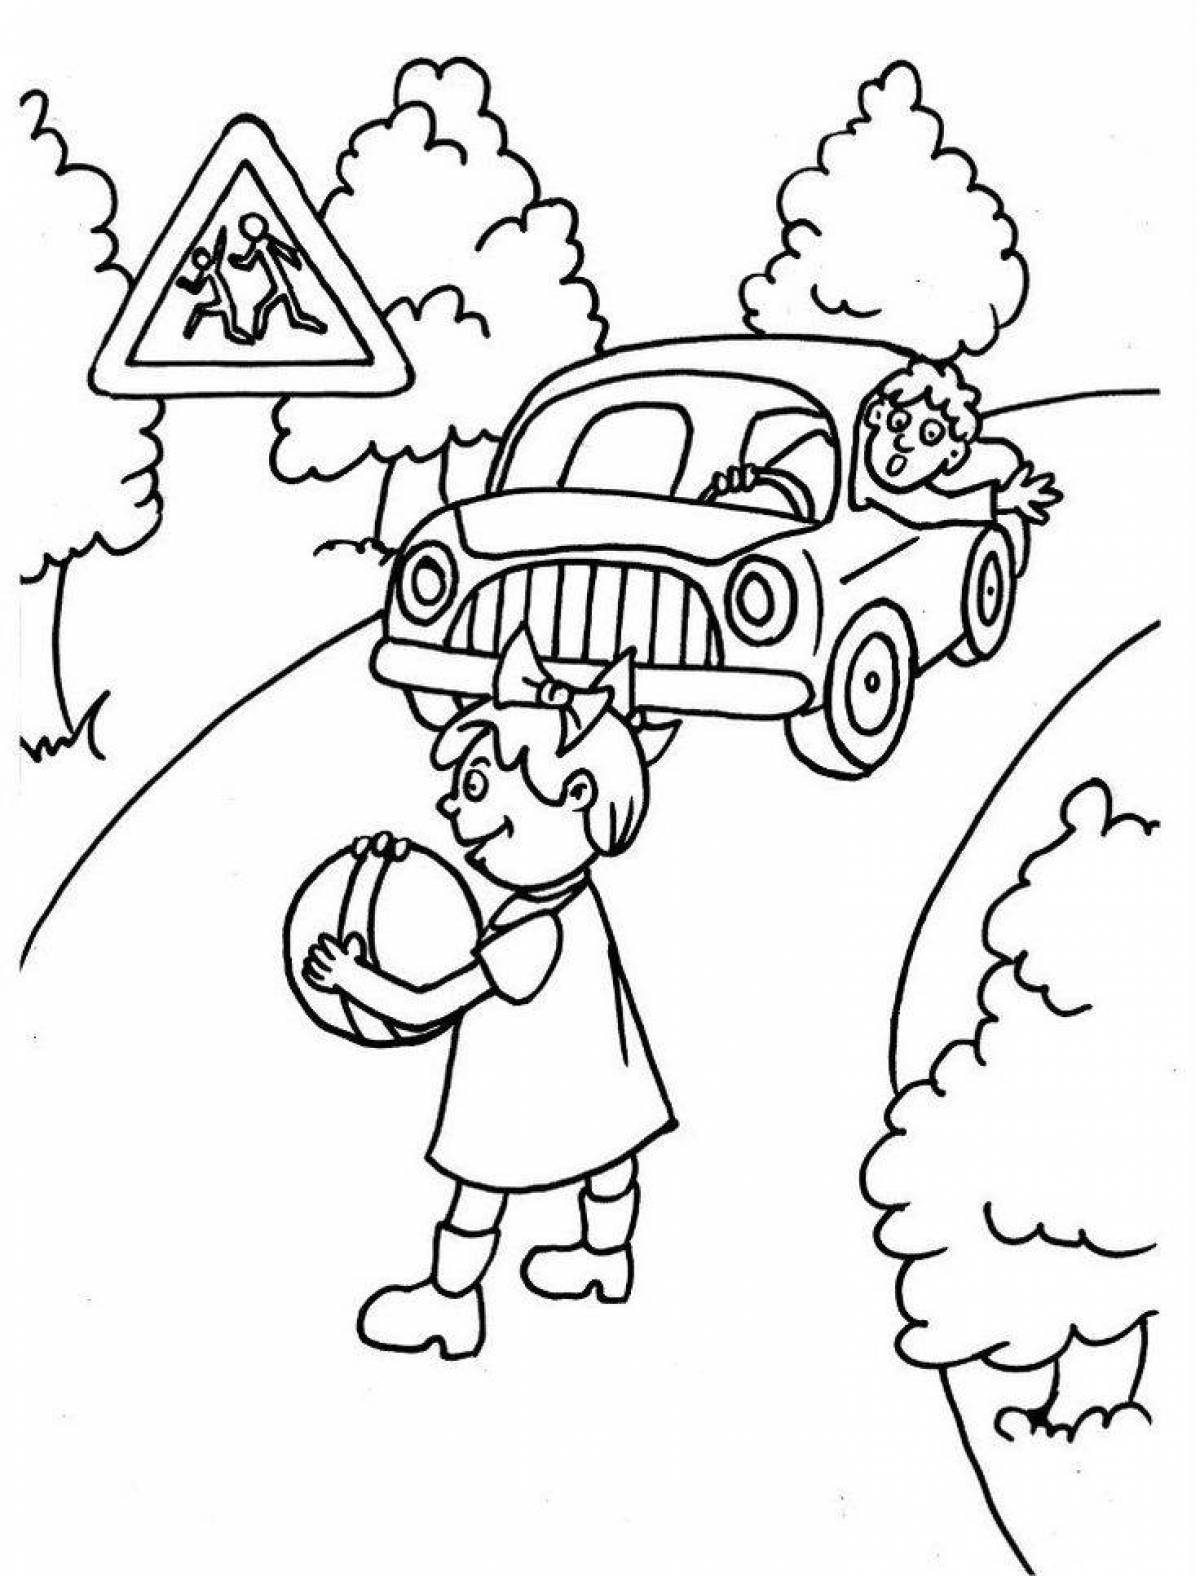 Colorful traffic rules coloring book for preschoolers